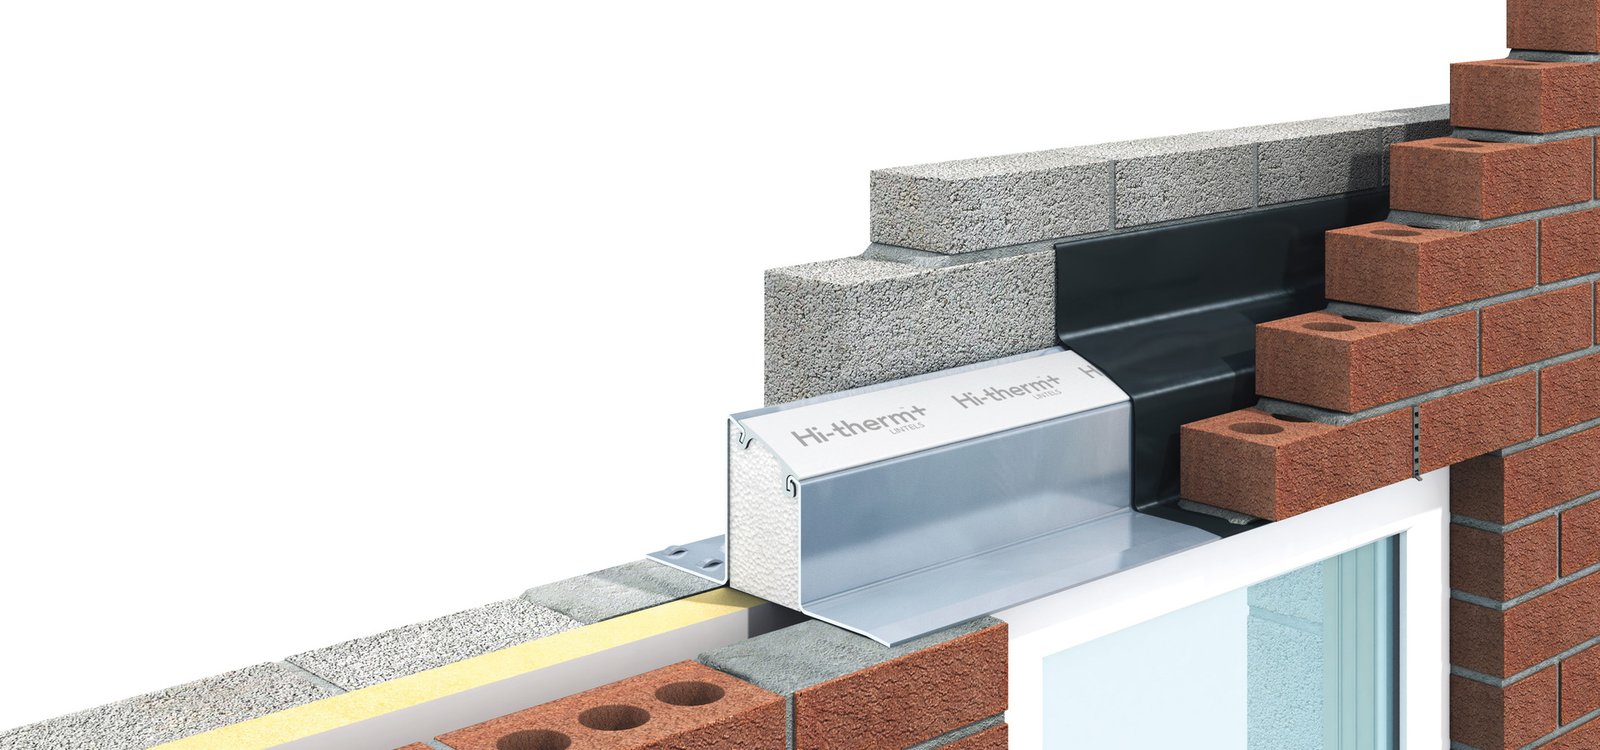 rb_Hi-therm+-Lintel-Product-Render_357 (3) (1)